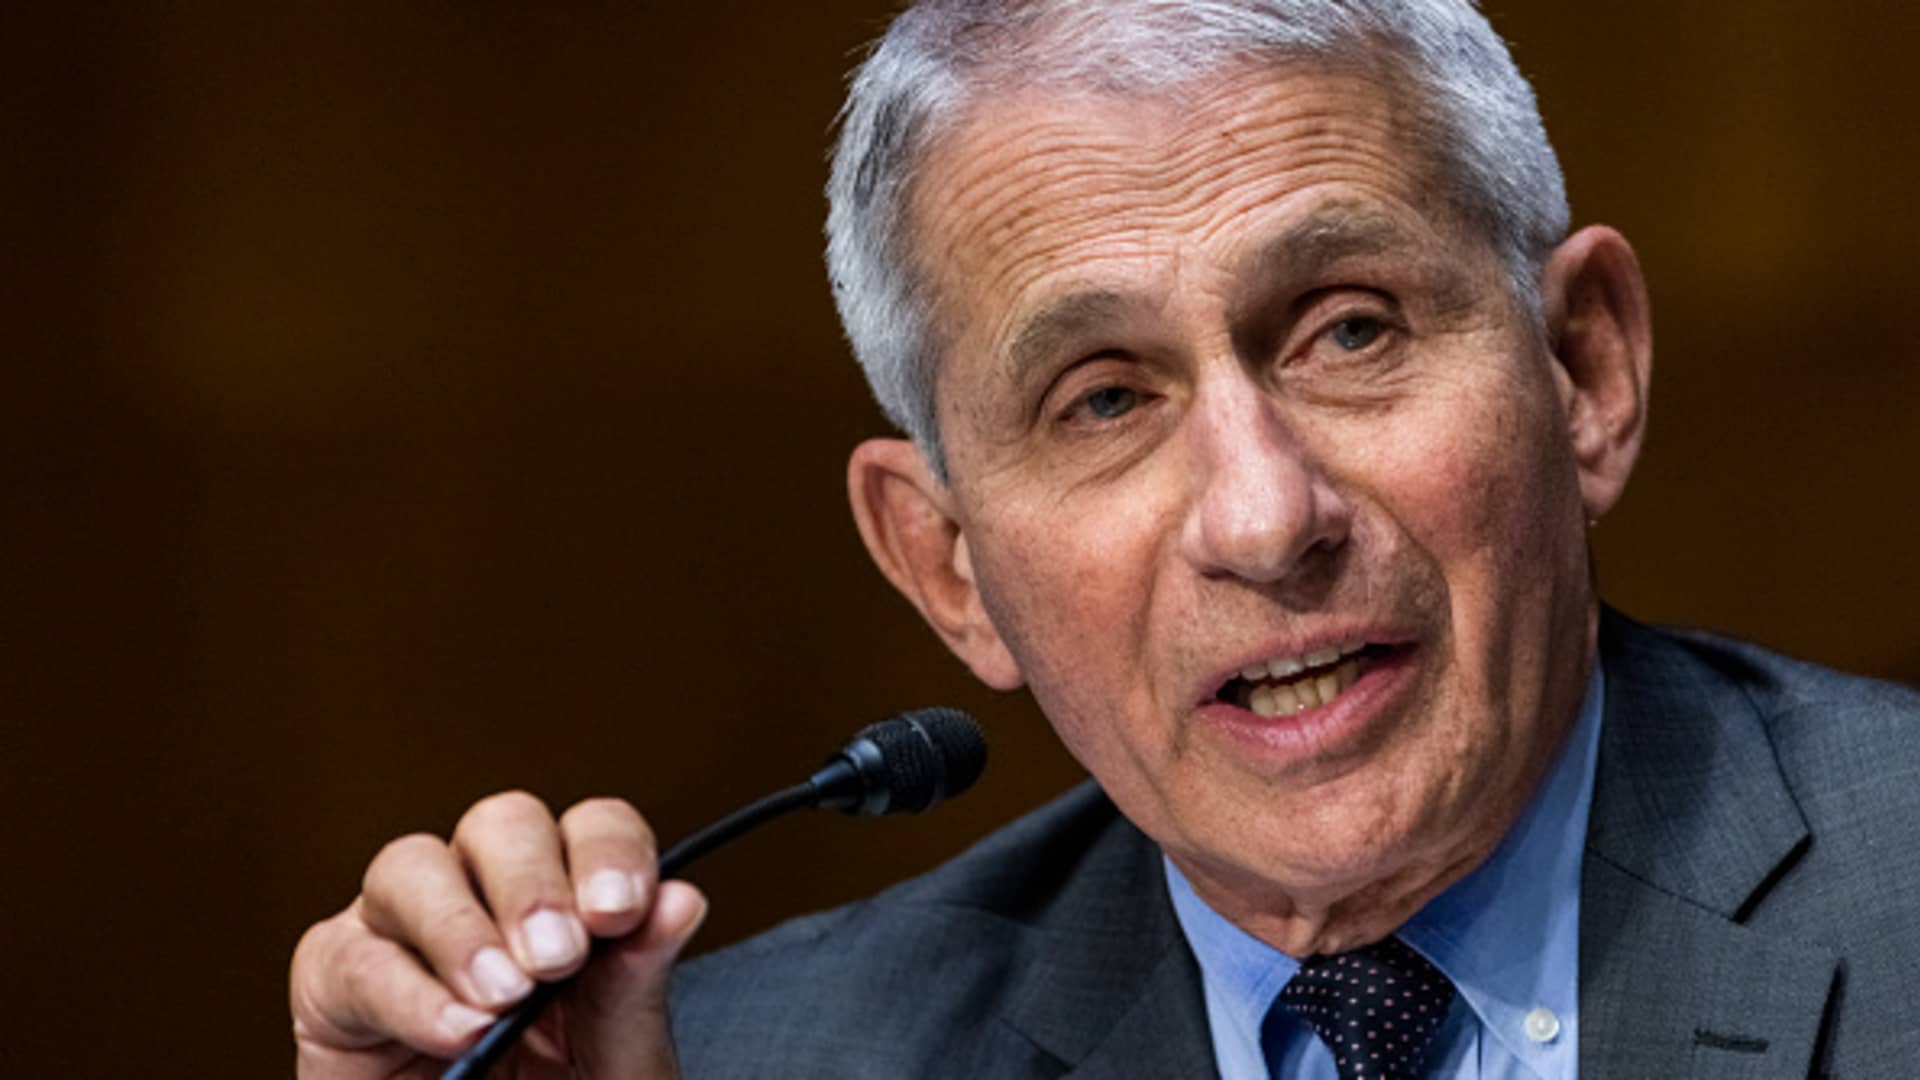 Anthony Fauci, Director of the National Institute of Allergy and Infectious Diseases at the National Institutes of Health (NIH), testifies before a Senate Health, Education, Labor, and Pensions hearing to examine an update from Federal officials on efforts to combat COVID-19 in the Dirksen Senate Office Building on May 11, 2021 in Washington, DC.